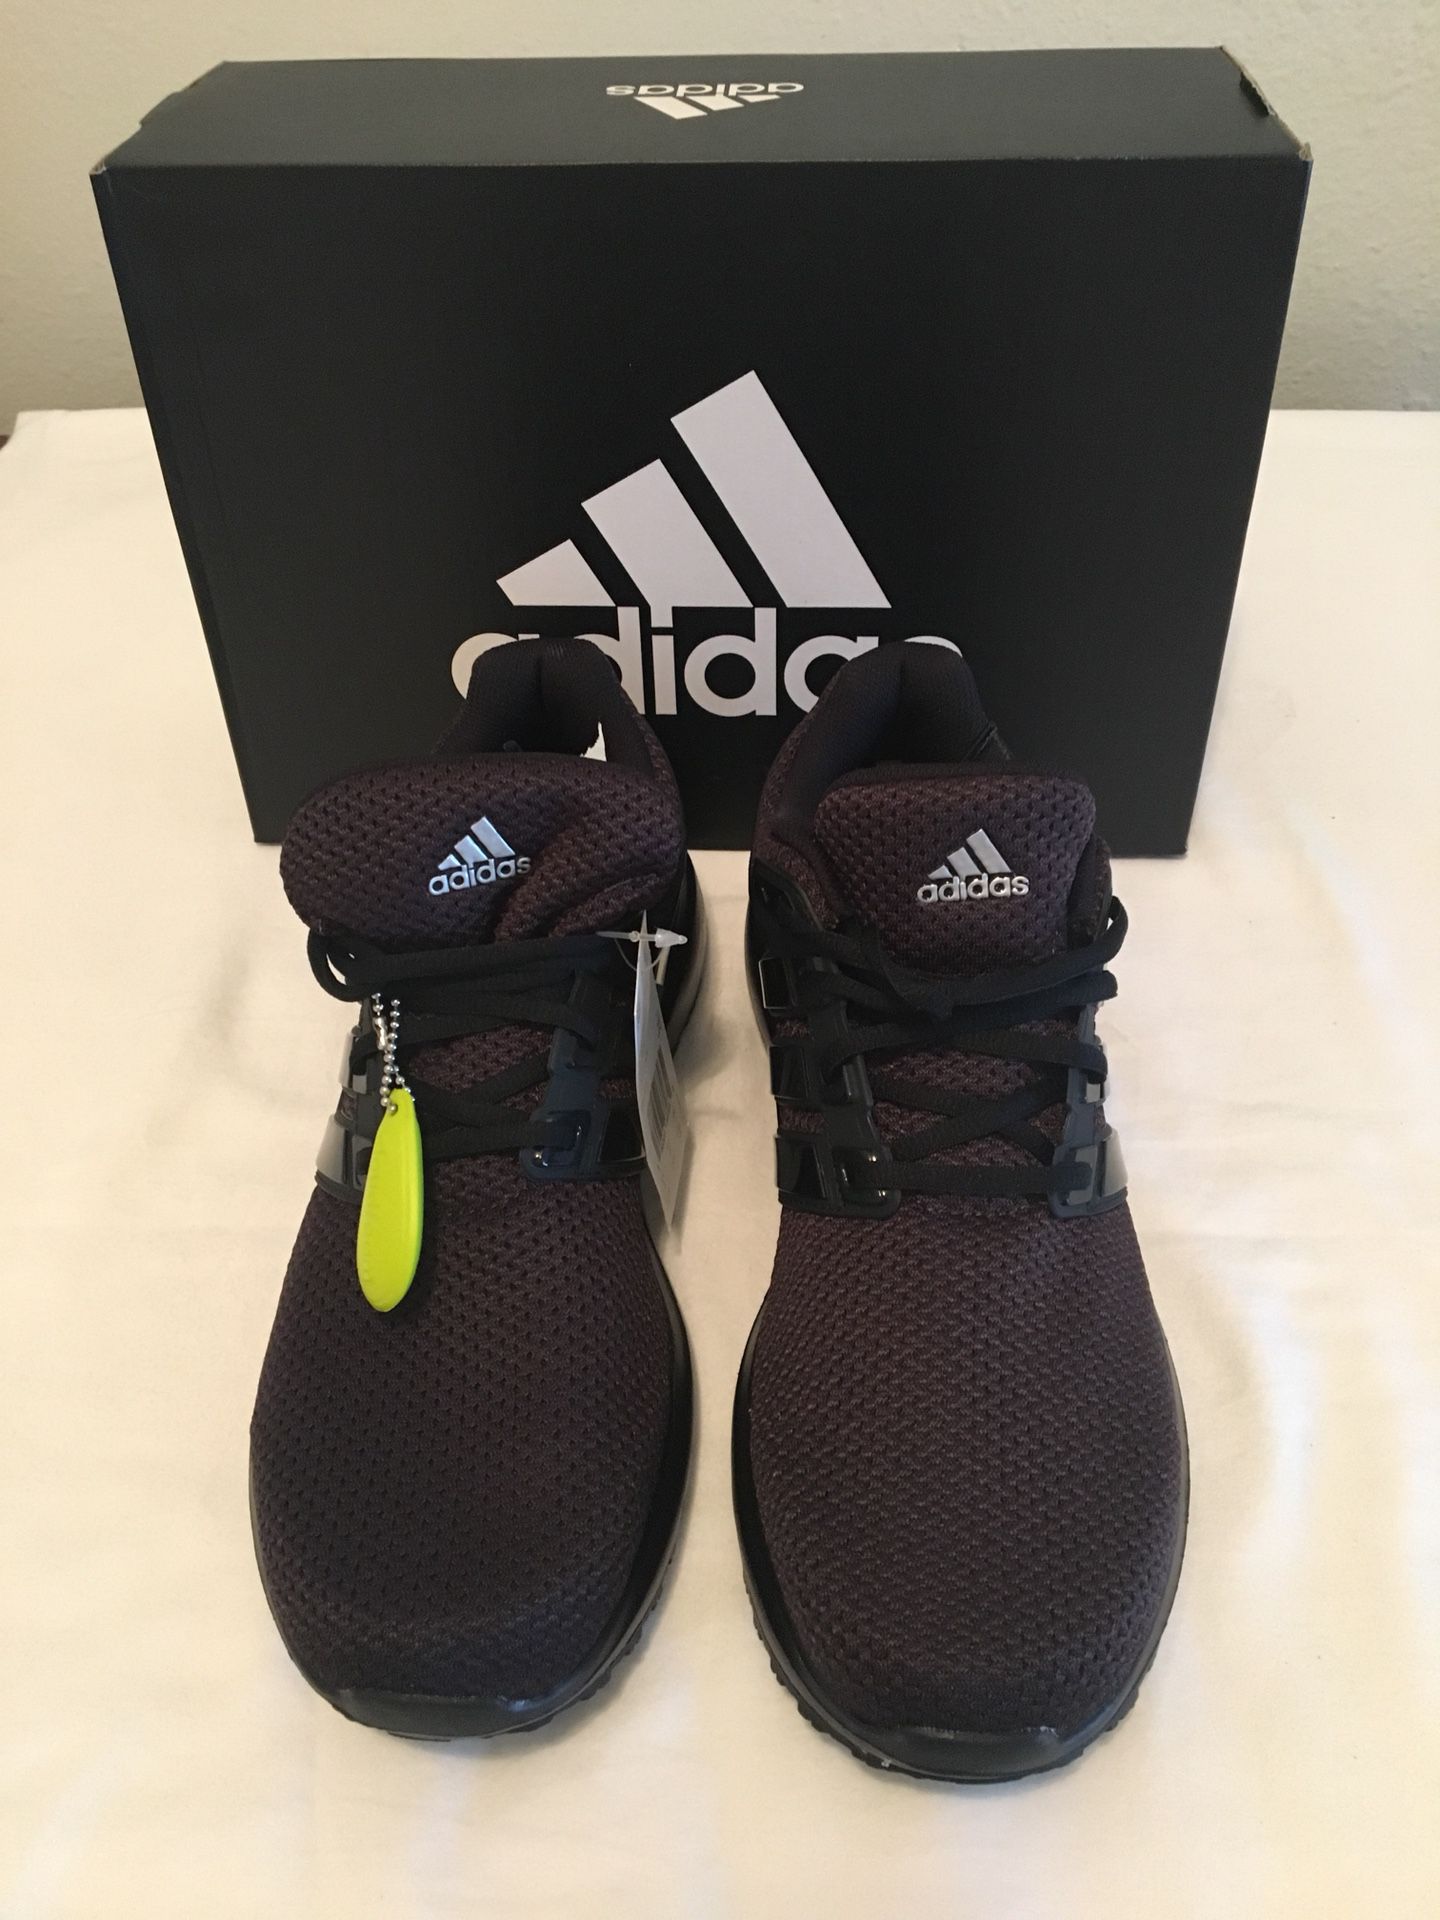 Adidas Energy cloudfoam Running sneakers shoes size 11.5M black PRICE FIRM!!! for Sale in Houston,